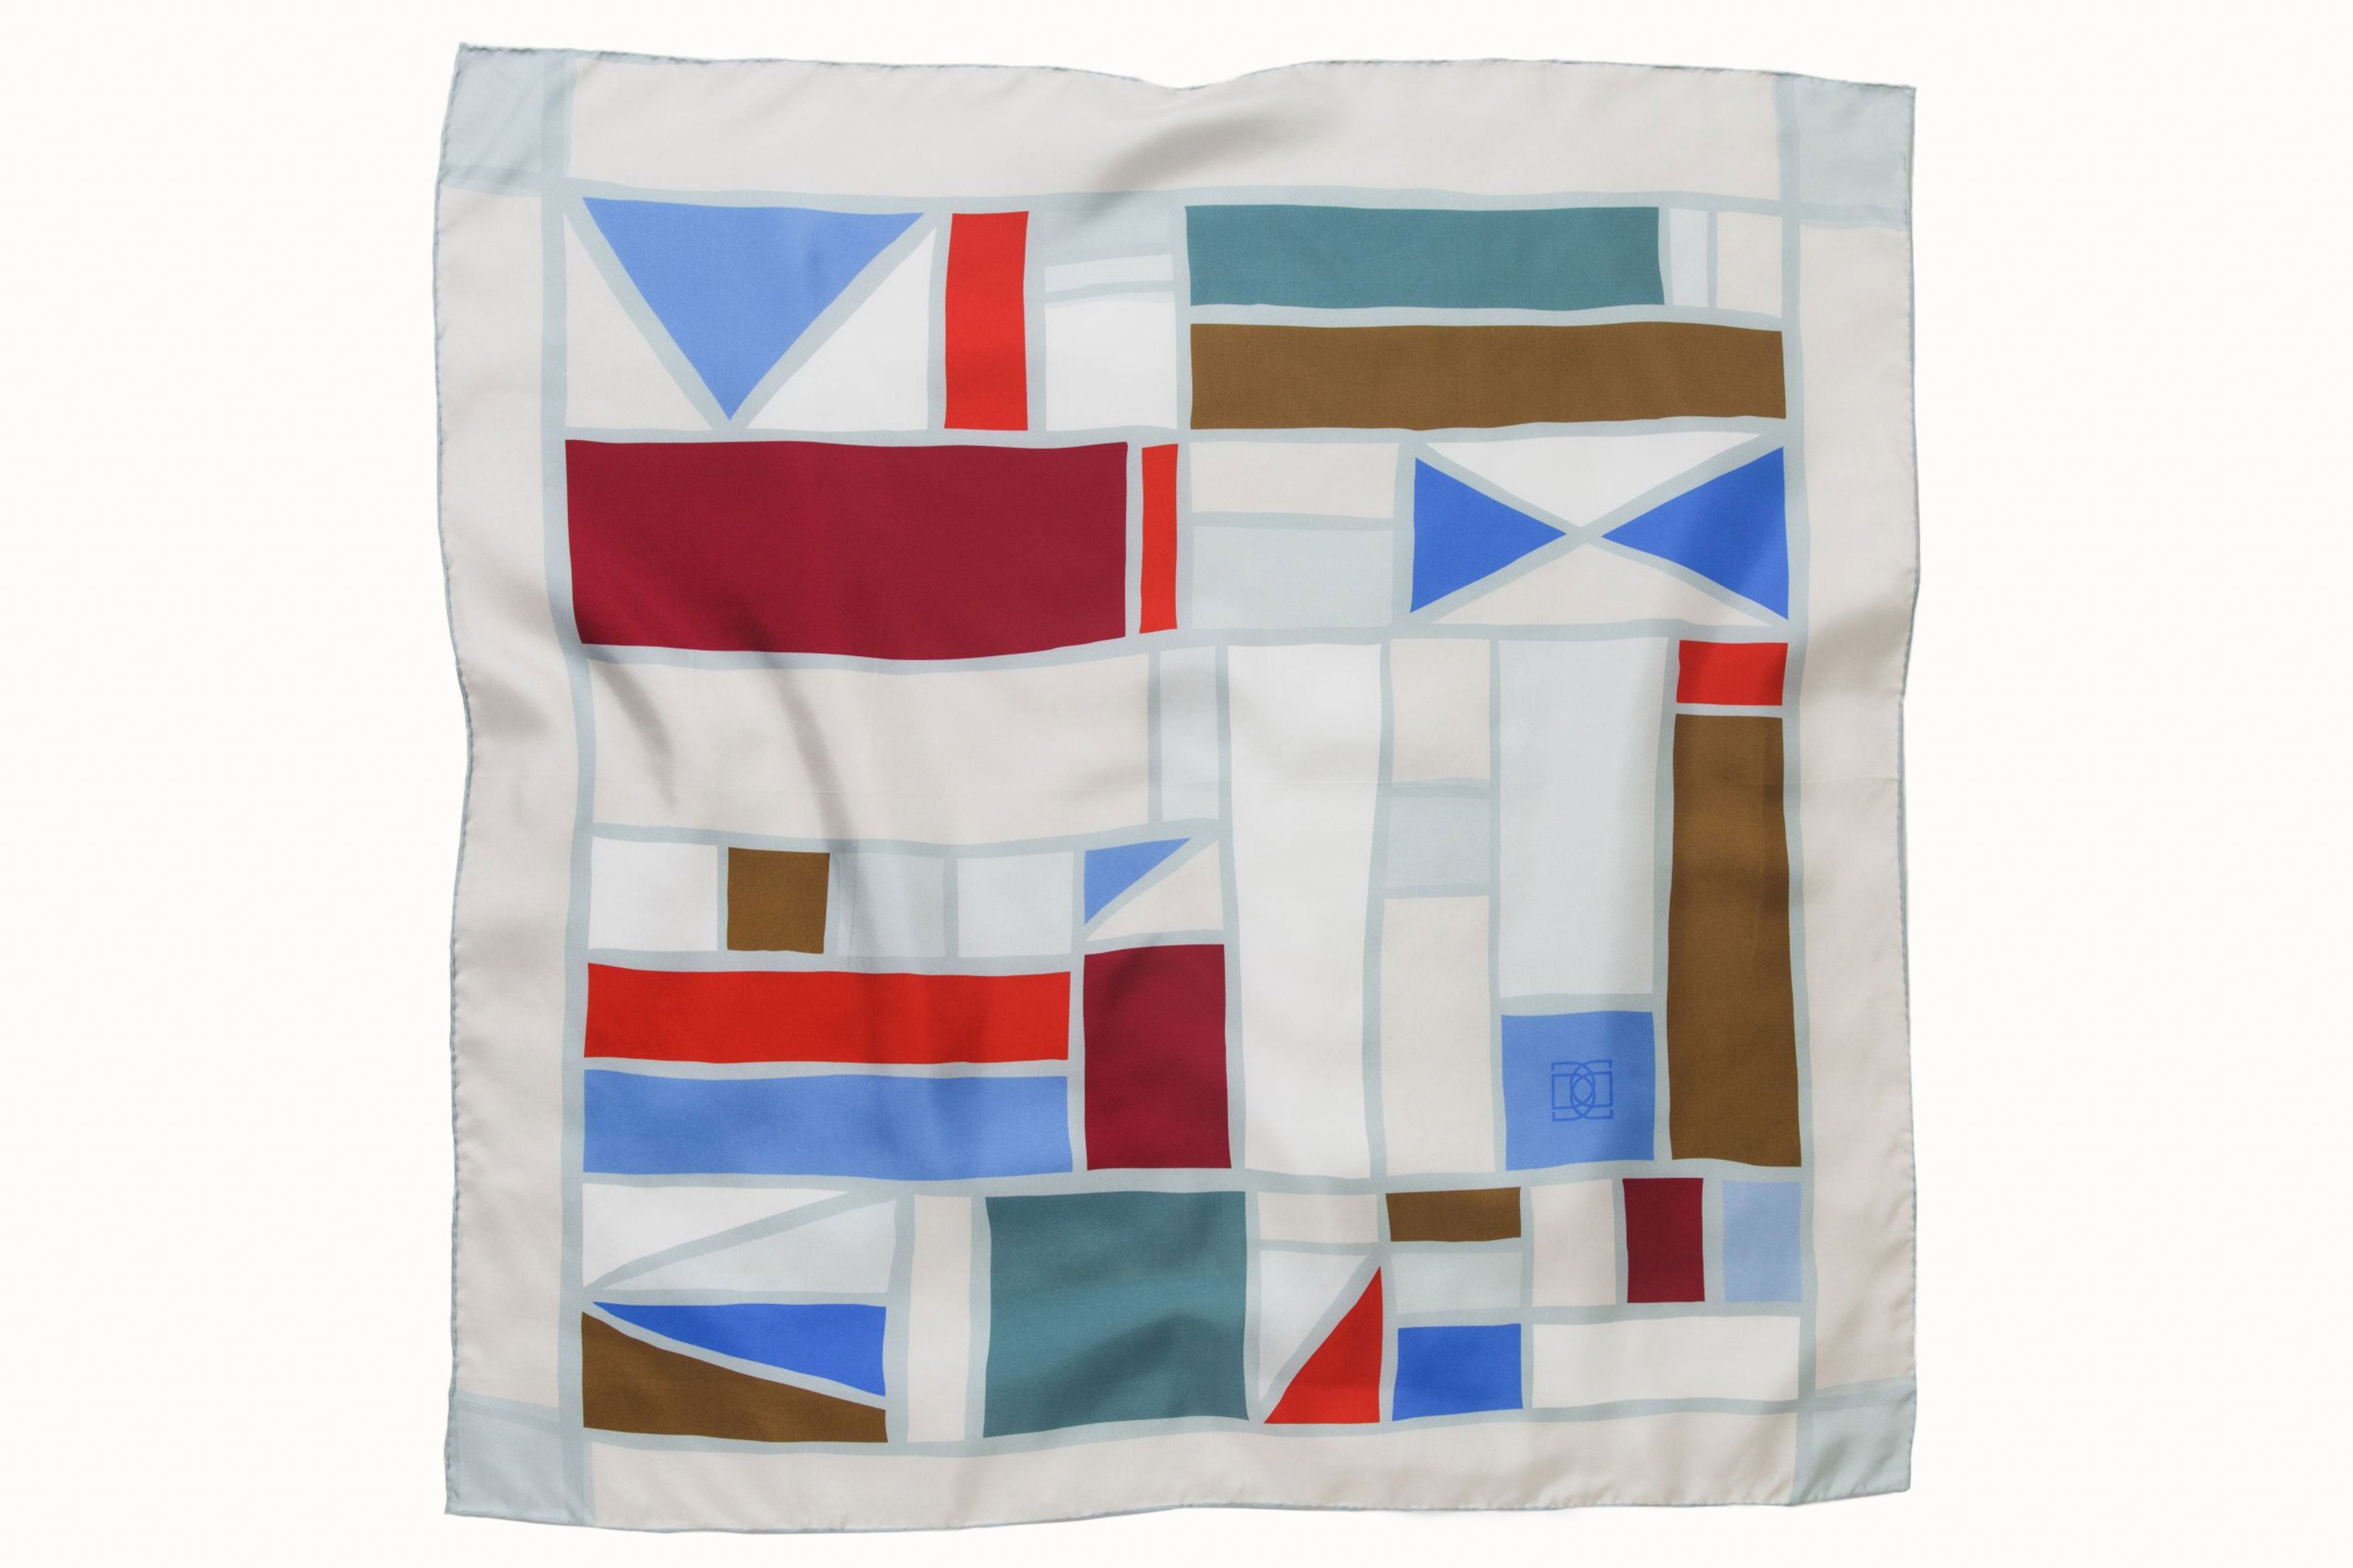 Flatlay image of 100% silk square scarf featuring a grouping of squares and rectangles of various sizes on an ecru background. Colors featured include crimson, cherry, khaki, cornflower blue and teal.